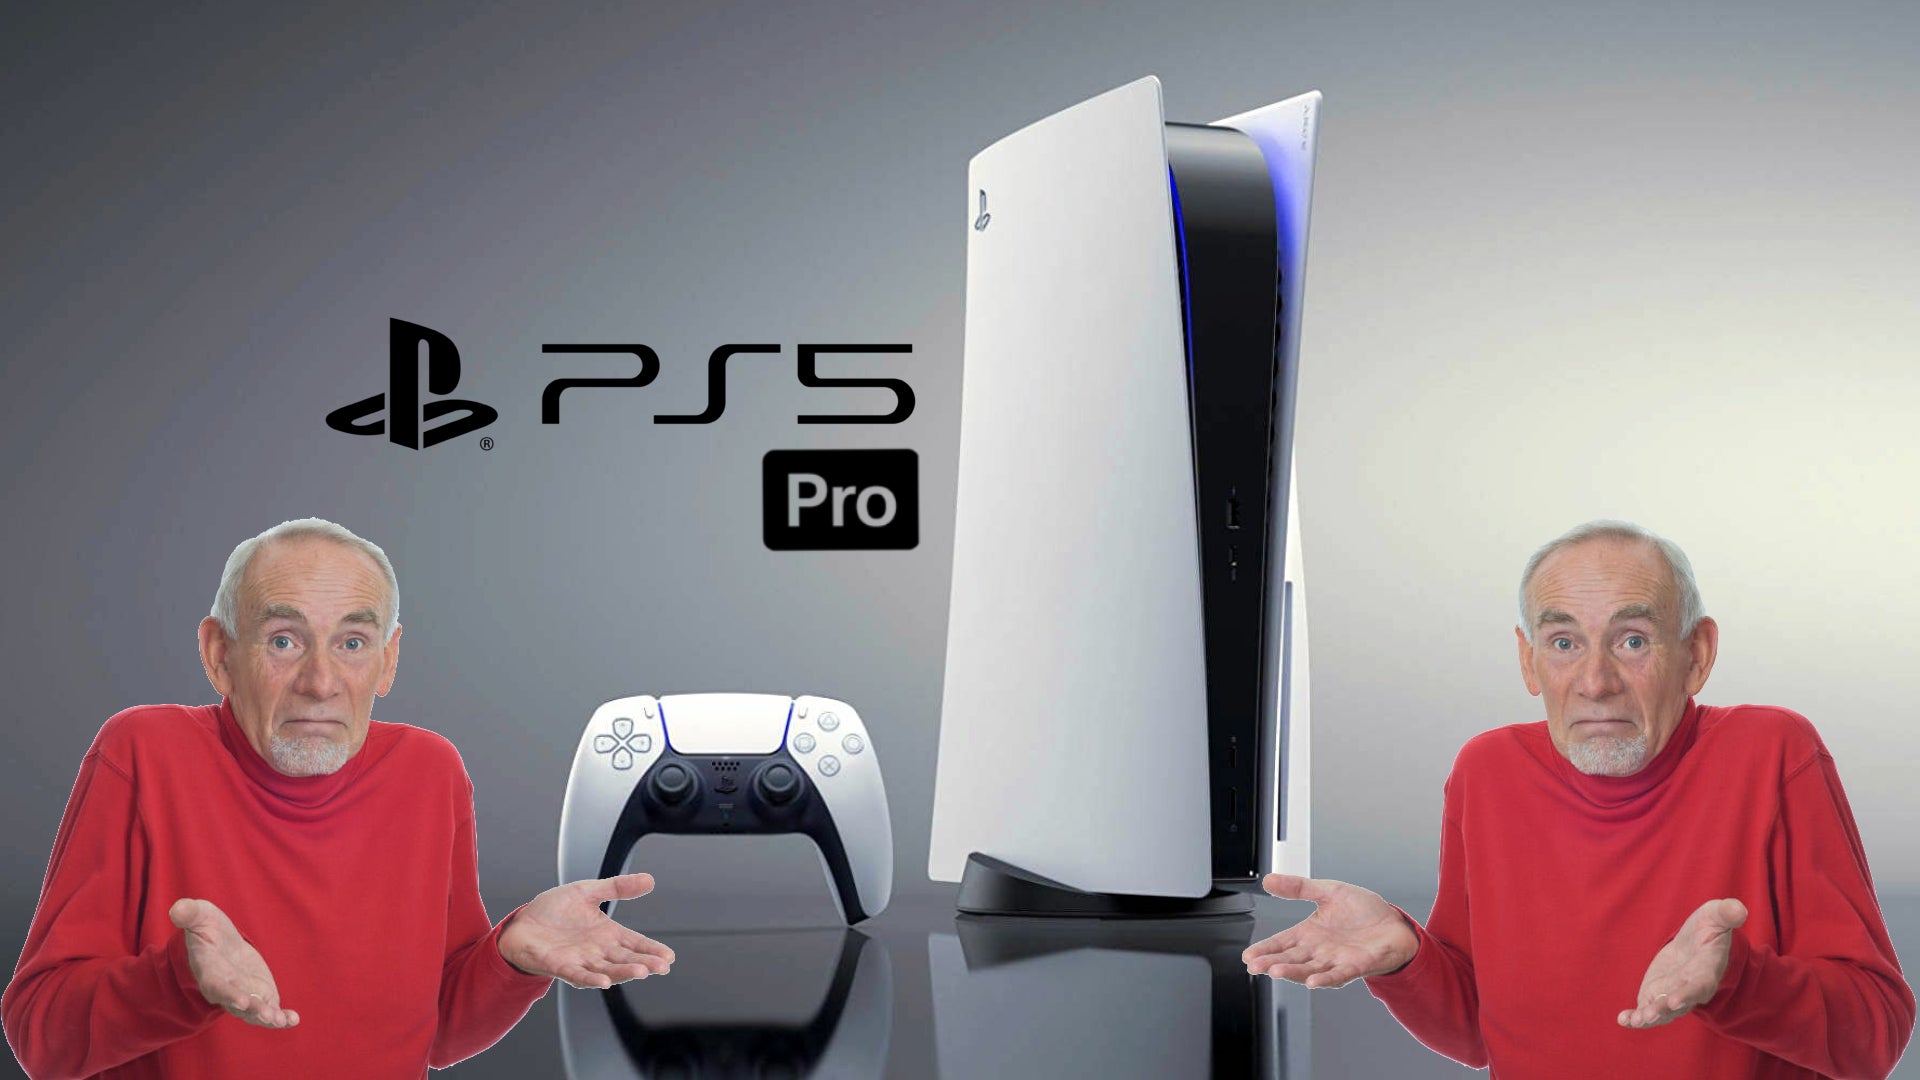 Image for PS5 Pro? Even if the spurious rumors are true, right now I just don't care